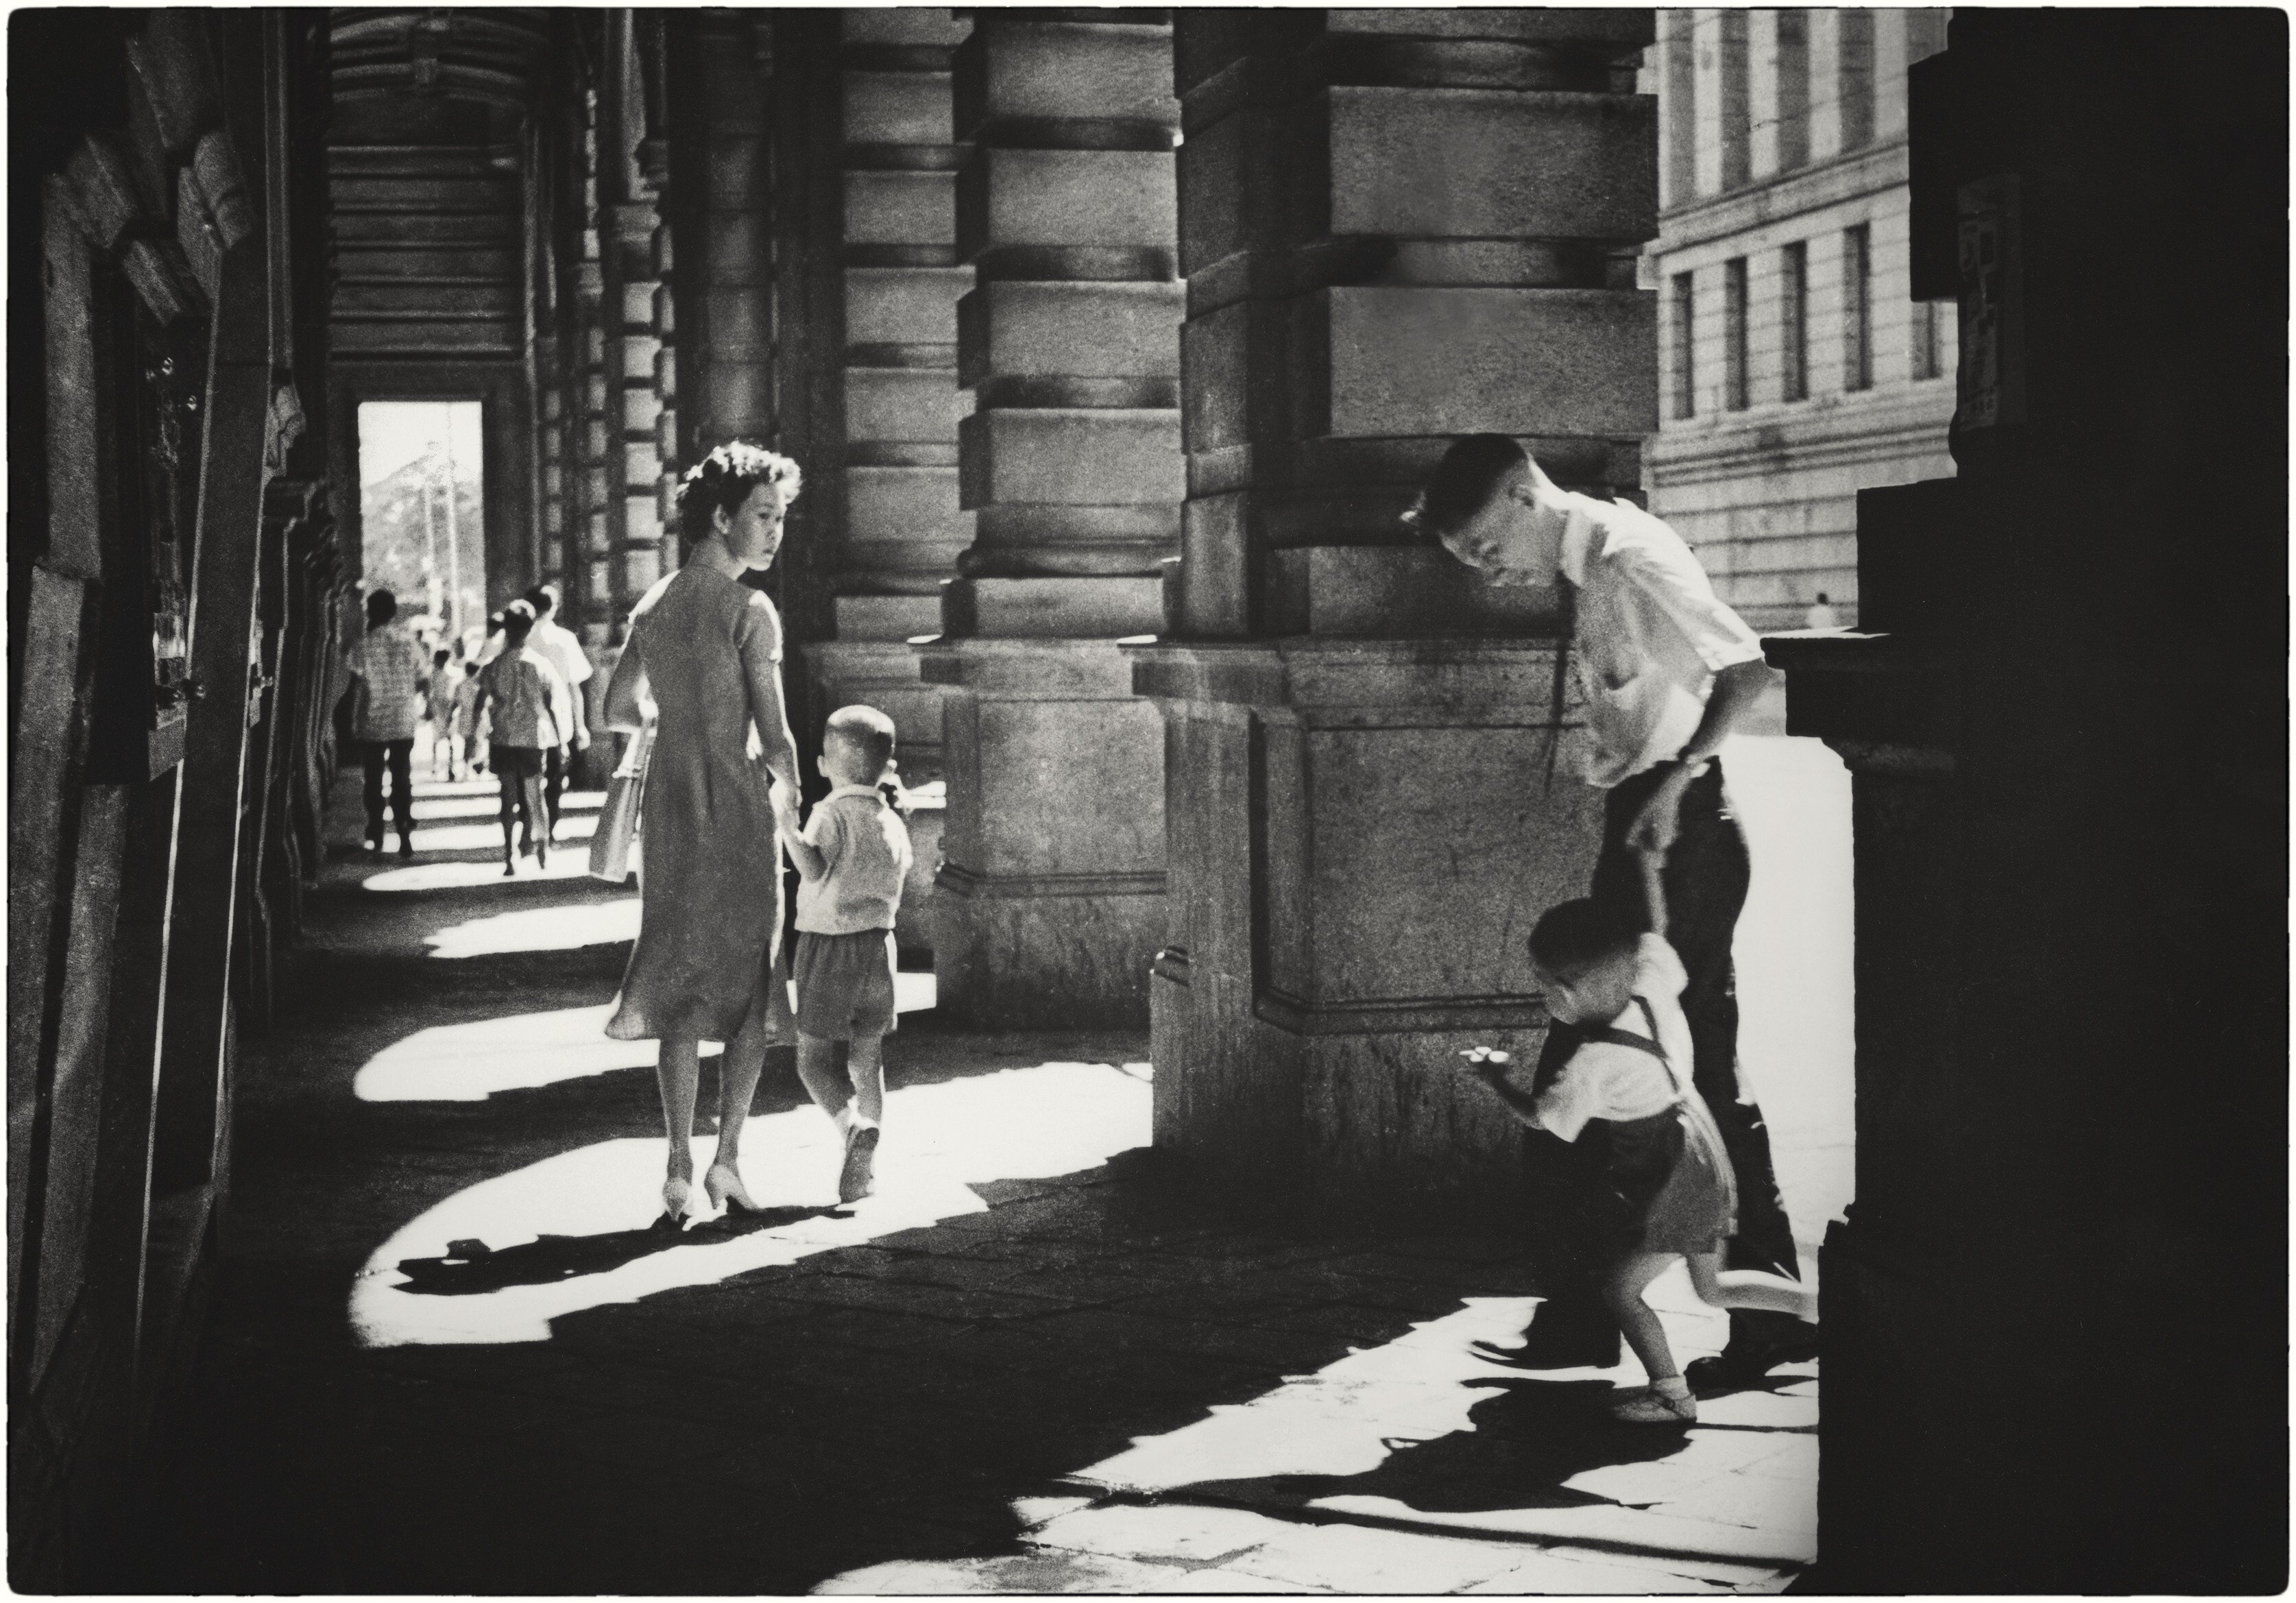 Walking Together (1958), featuring Central’s original Prince’s Building, which was demolished in 1963. Photo: Chung Man-lurk